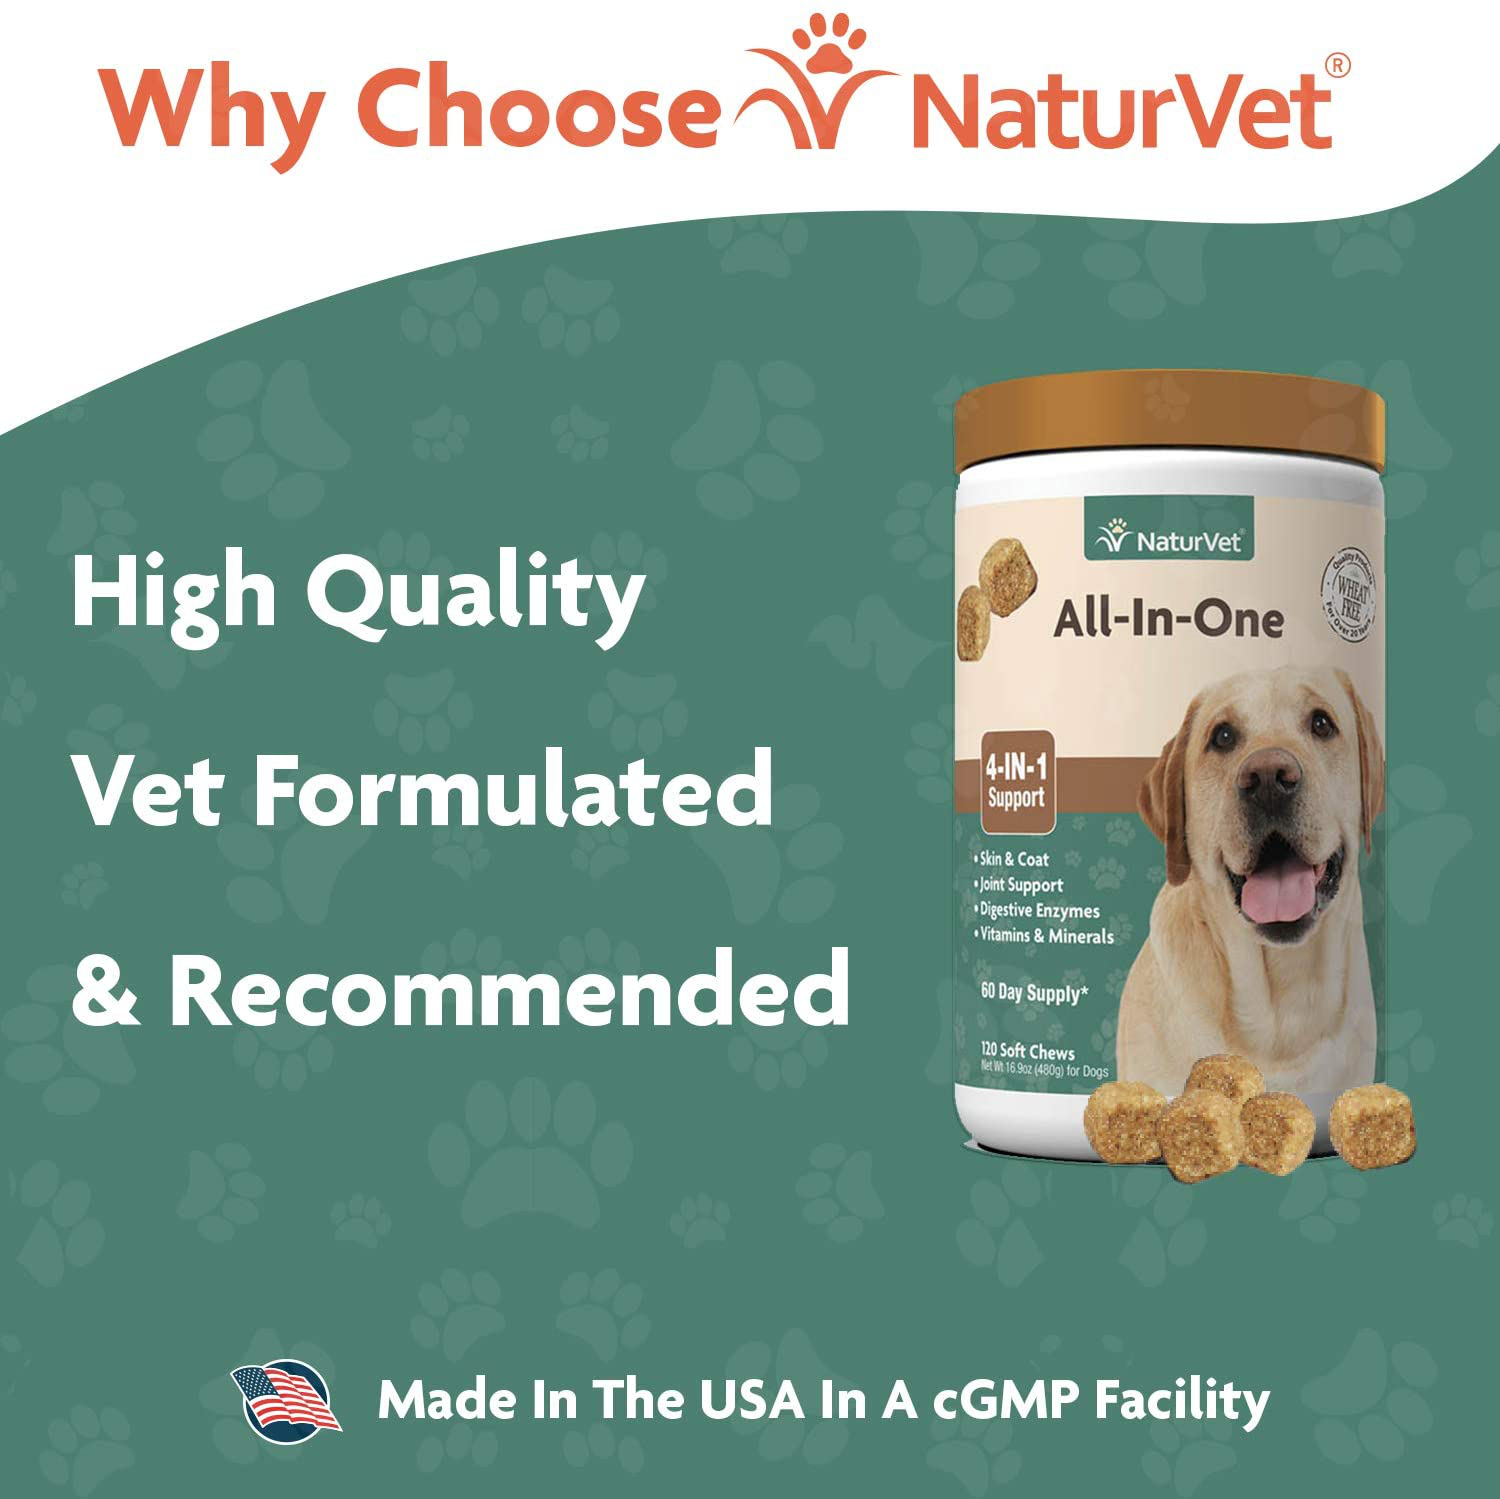 NaturVet All-in-One Dog Supplement - for Joint Support, Digestion, Skin, Coat Care – Dog Vitamins, Minerals, Omega-3, 6, 9 – Wheat-Free Supplements